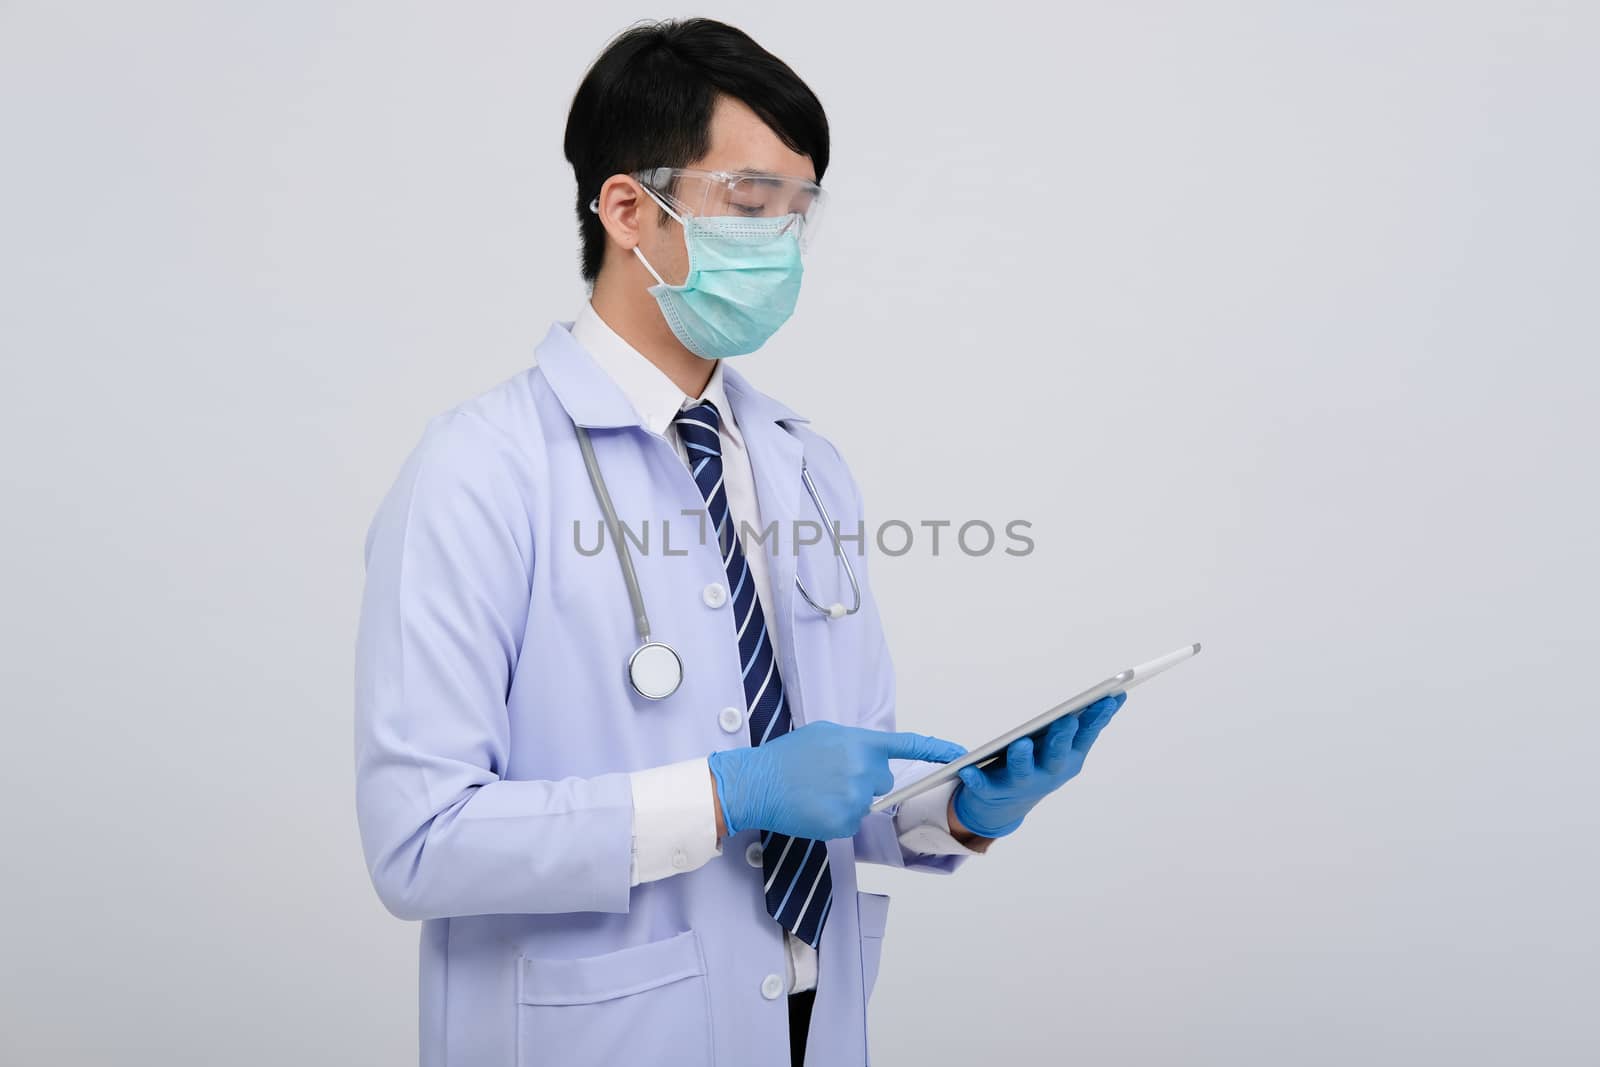 doctor physician practitioner wearing mask with tablet & stethoscope on white background. medical professional medicine healthcare concept